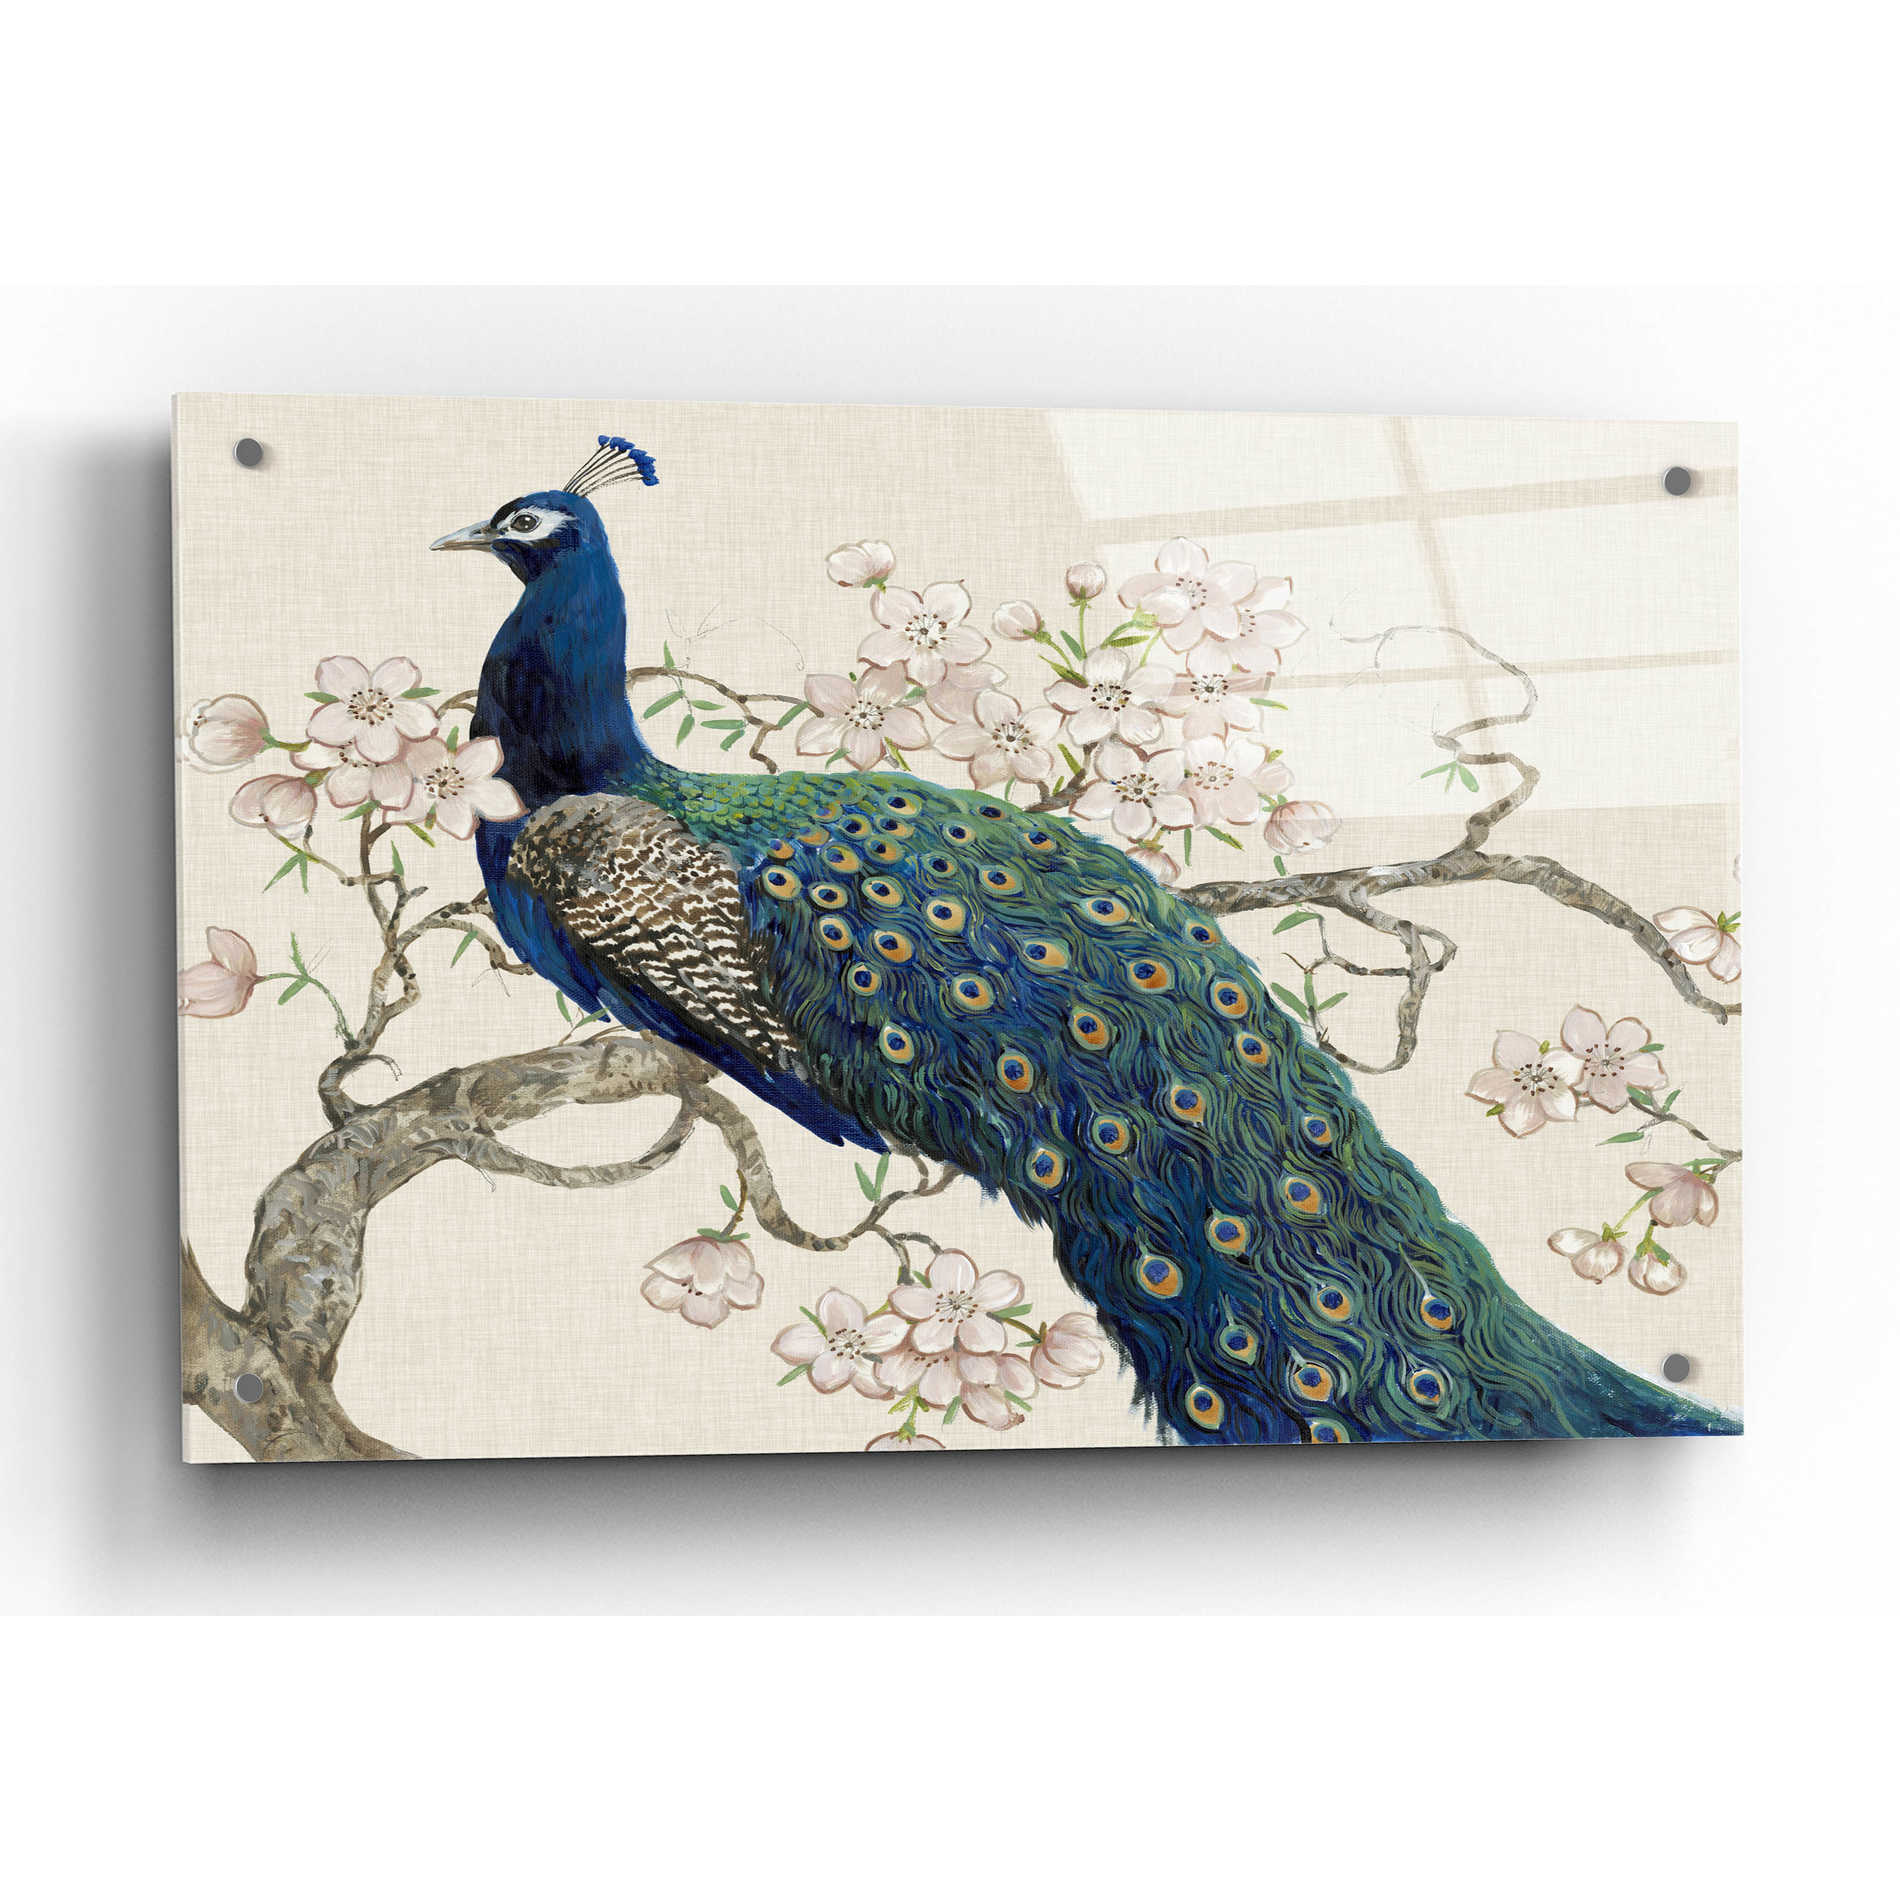 Epic Art 'Peacock & Blossoms II' by Tim O'Toole, Acrylic Glass Wall Art,36x24